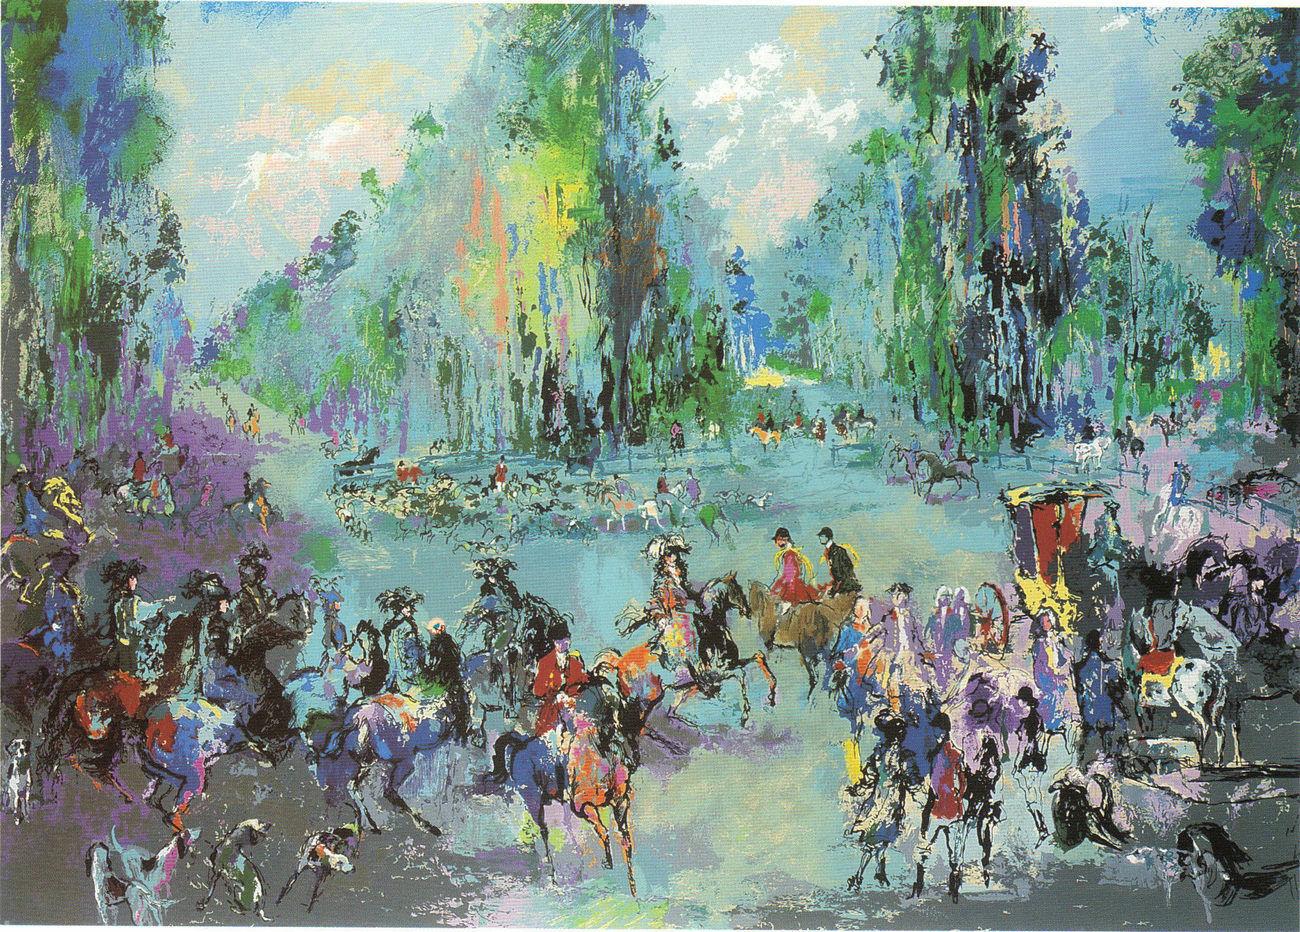 LEROY NEIMAN "HUNT RENDEZVOUS"

 

Up for sale is the Limited Edition Serigraph, "HUNT RENDEZVOUS" piece by LeRoy Neiman. This is a hand-signed and numbered serigraph and includes a Certificate of Authenticity.   

MEDIUM:  Serigraph

CONDITION: 